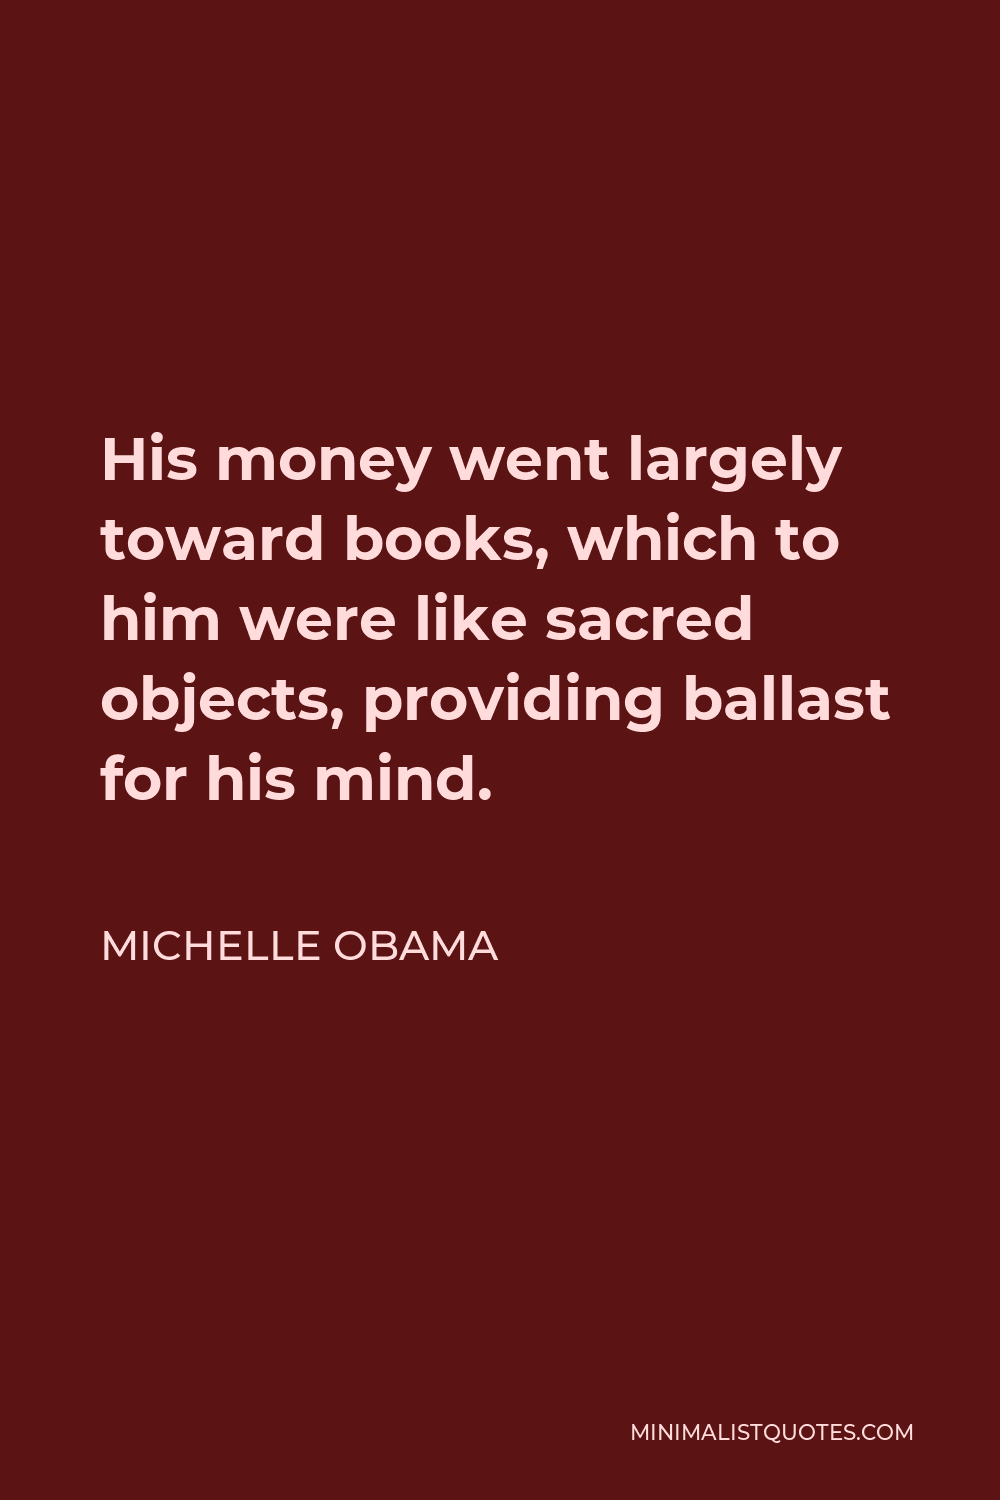 Michelle Obama Quote - His money went largely toward books, which to him were like sacred objects, providing ballast for his mind.